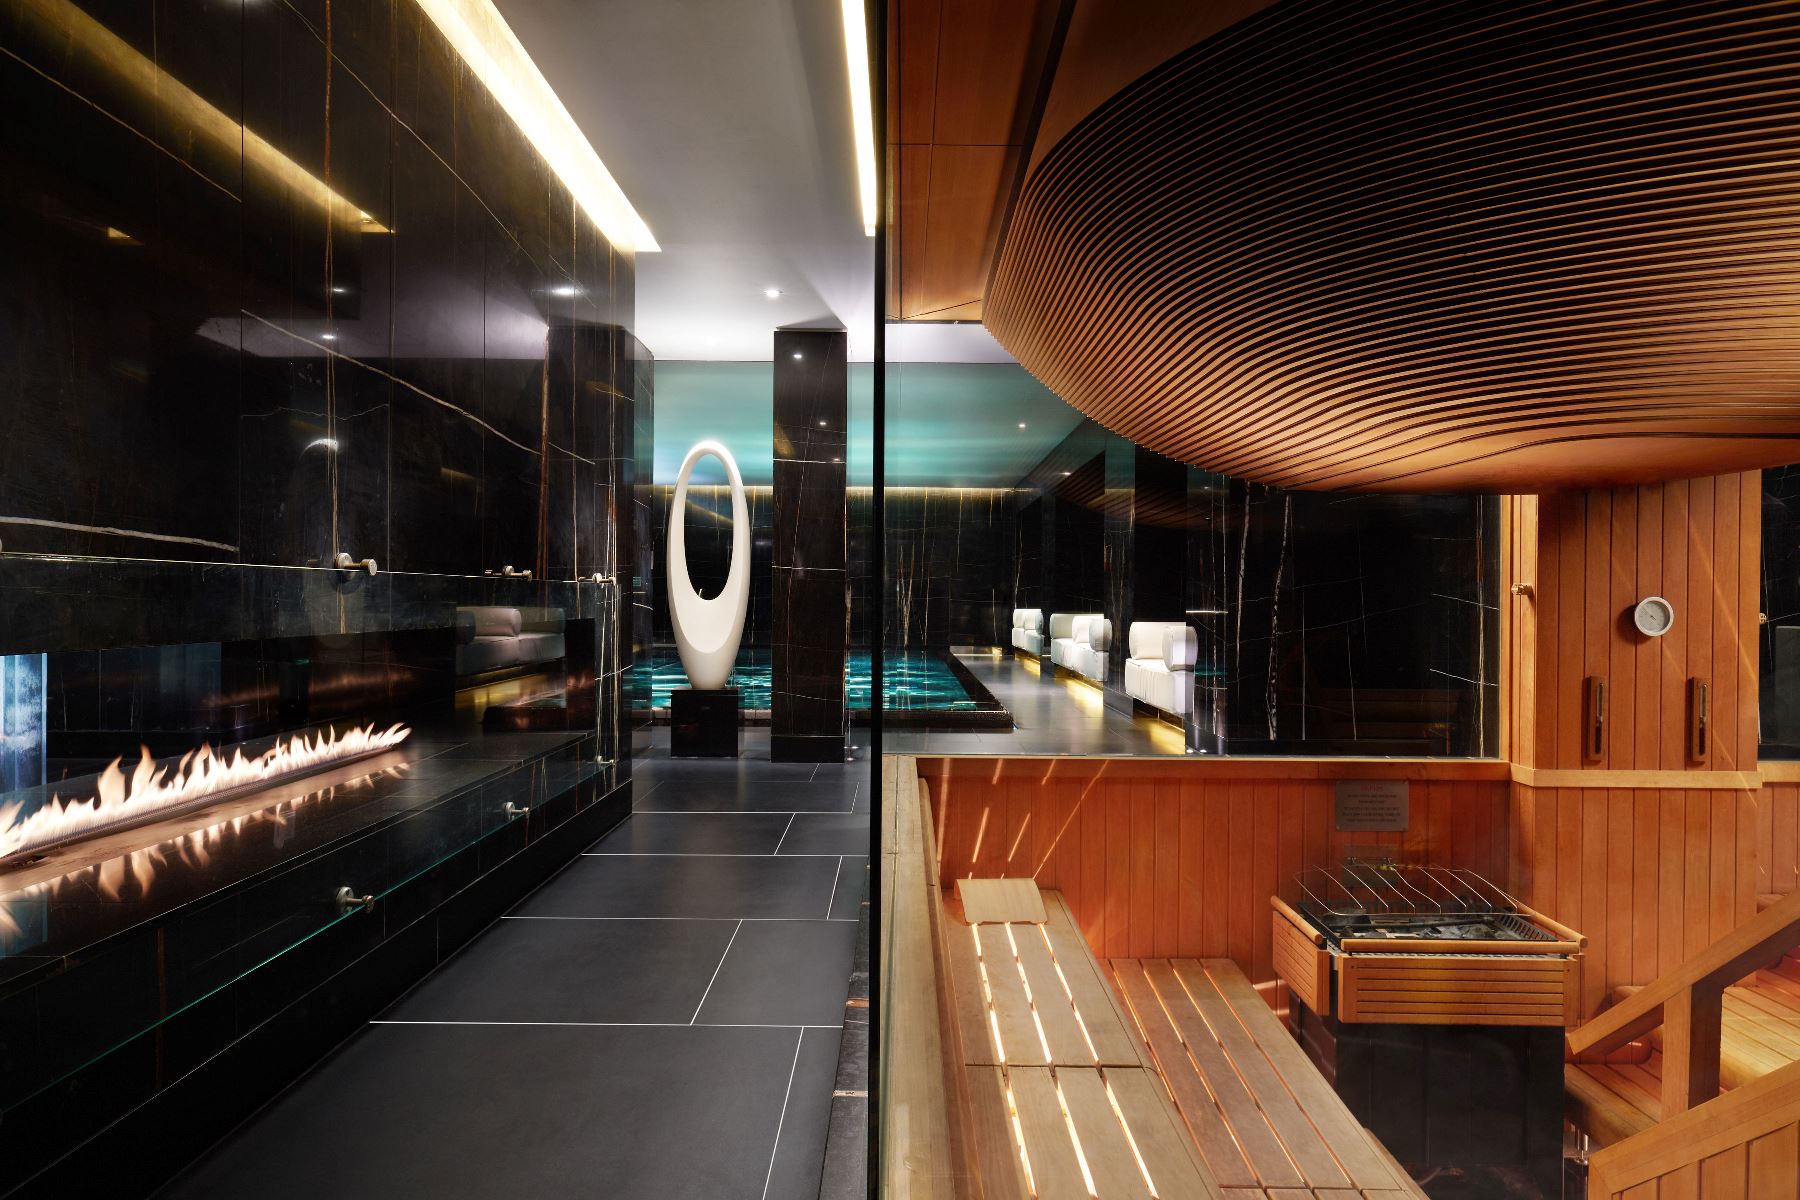 The sauna in the spa at the Corinthia Hotel in London